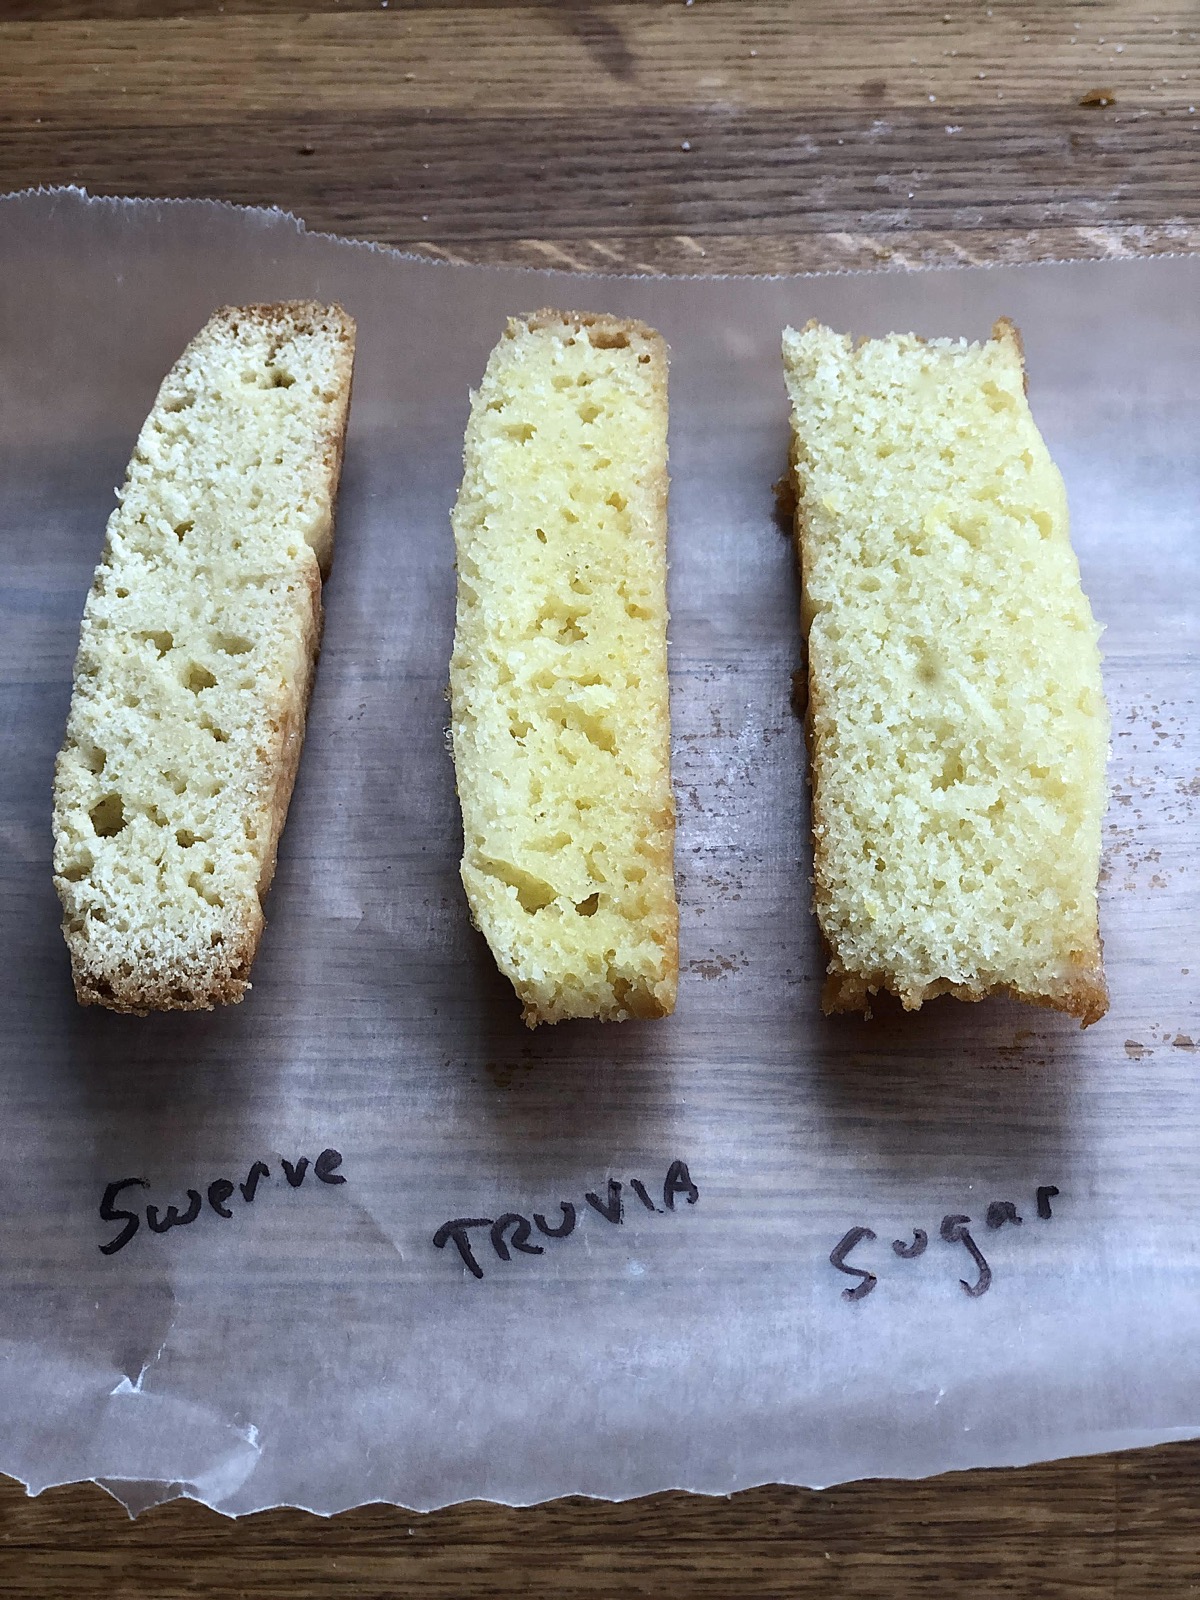 Three slices of cake baked with three different sweeteners, showing difference in rise and interior texture.